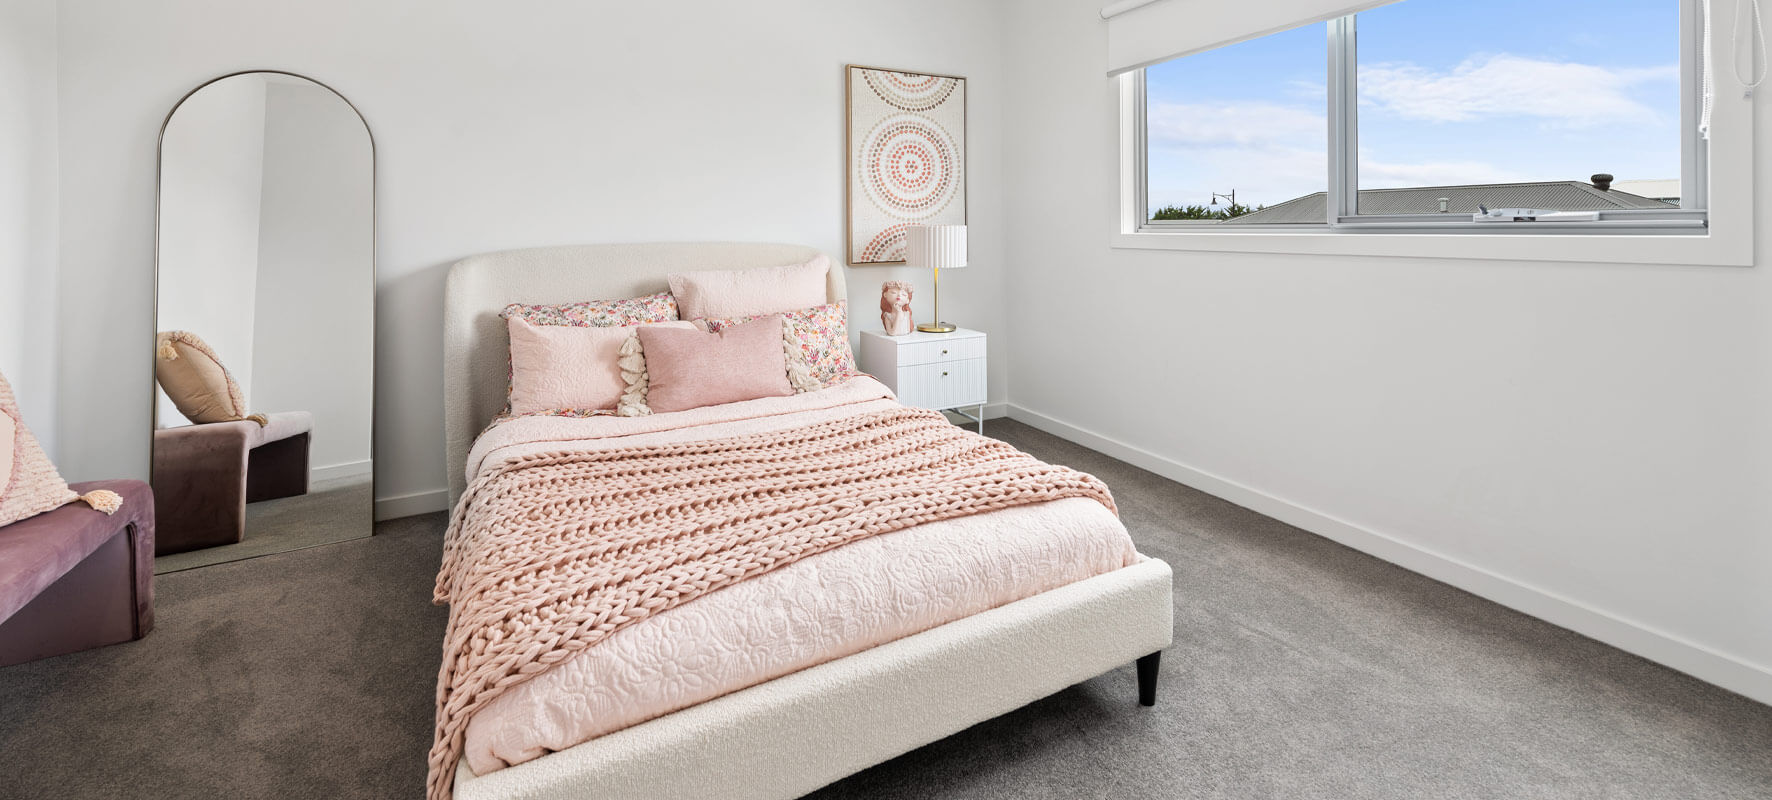 Photo of peaceful looking bedroom with white bed and soft pink cushions and blankets